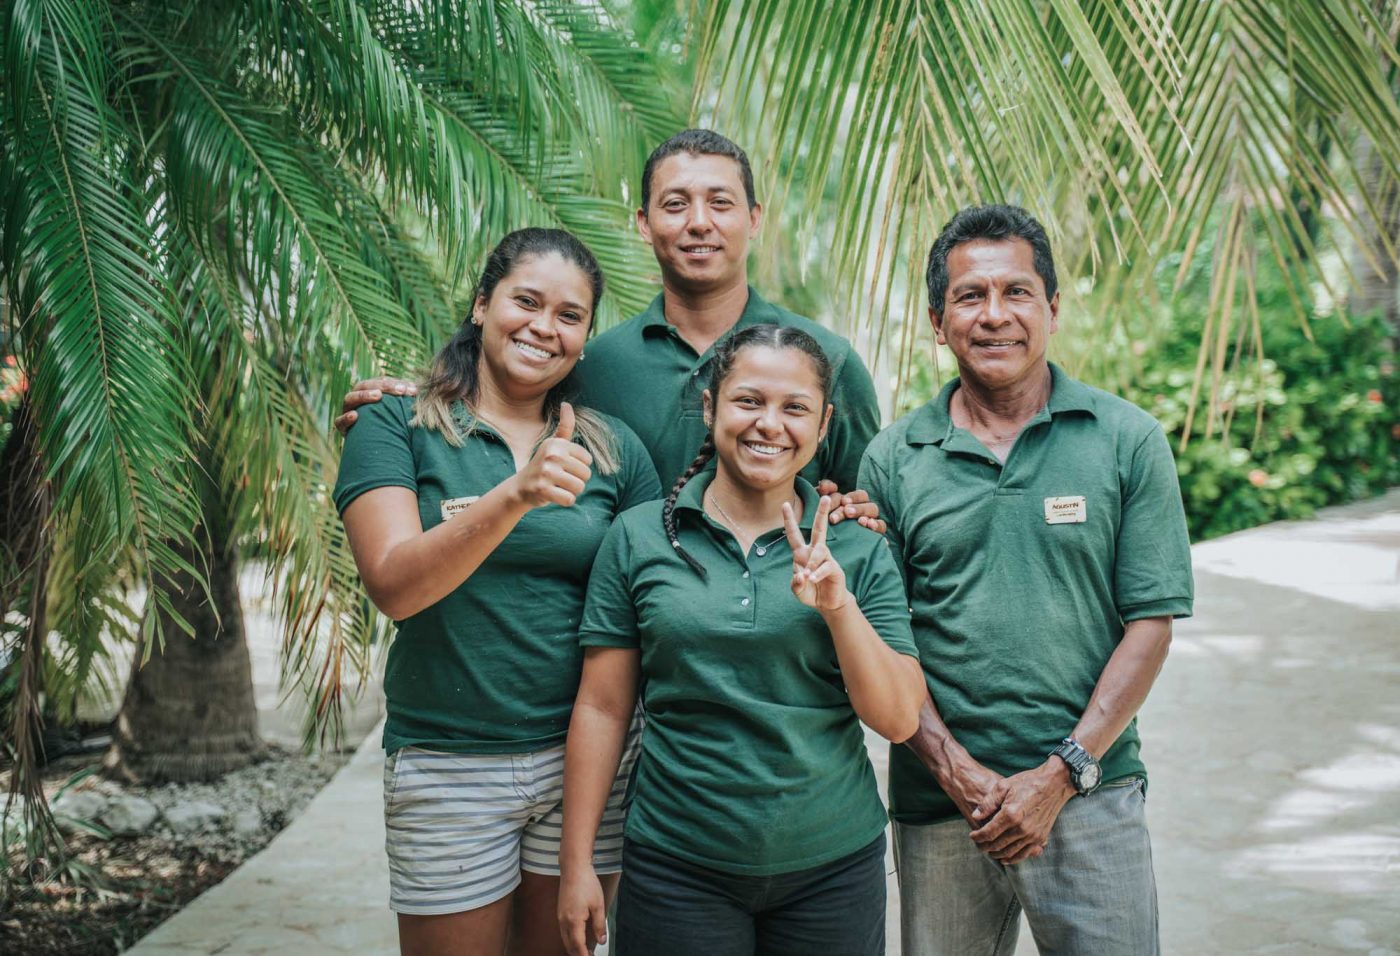 Just a few of the local staff at the Drift Away Eco Lodge